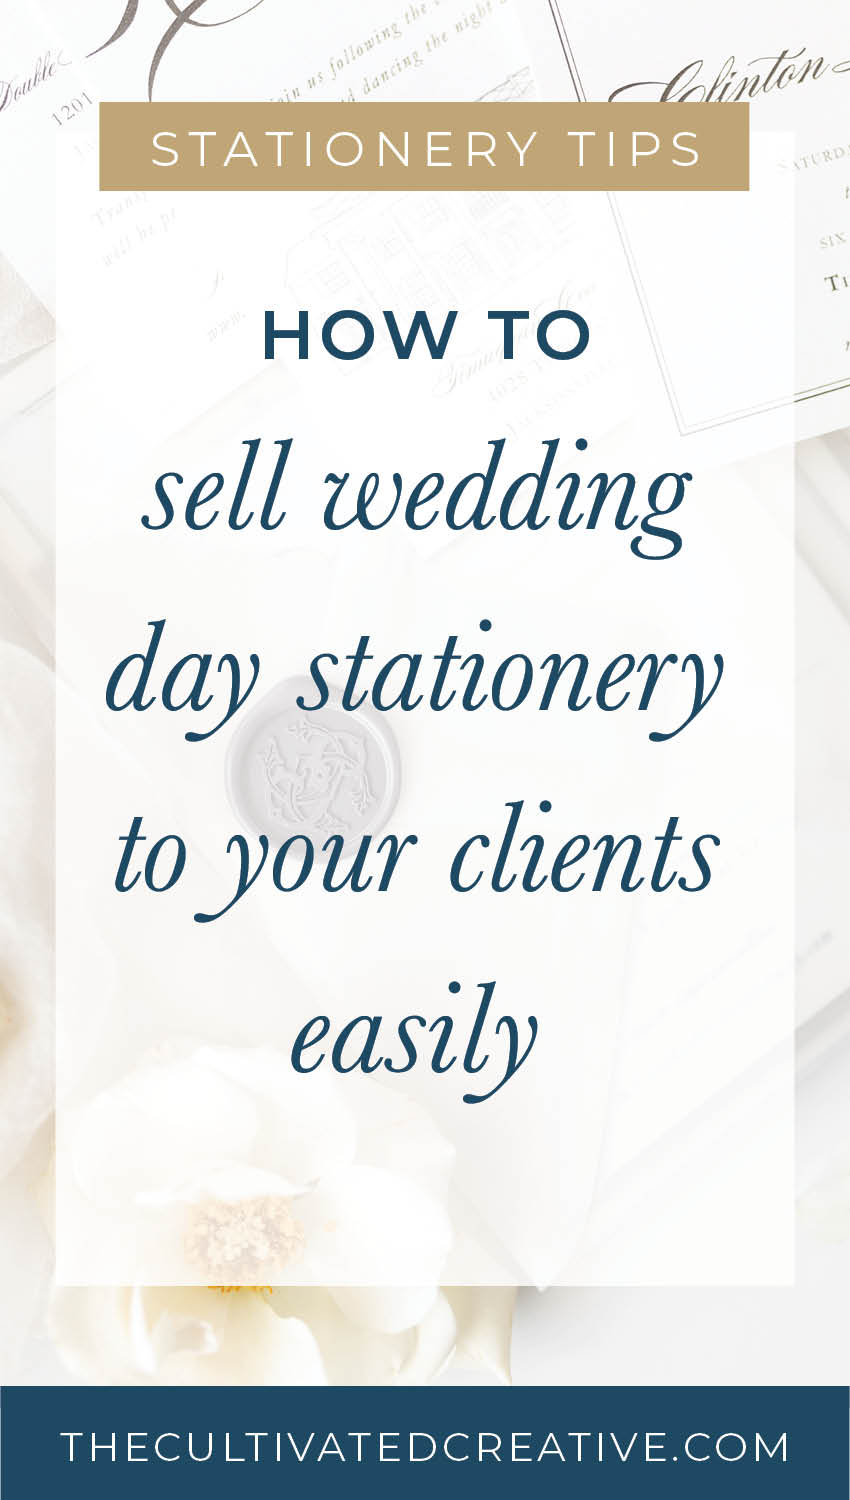 how to easily sell wedding day stationery to your clients to boost your stationery business